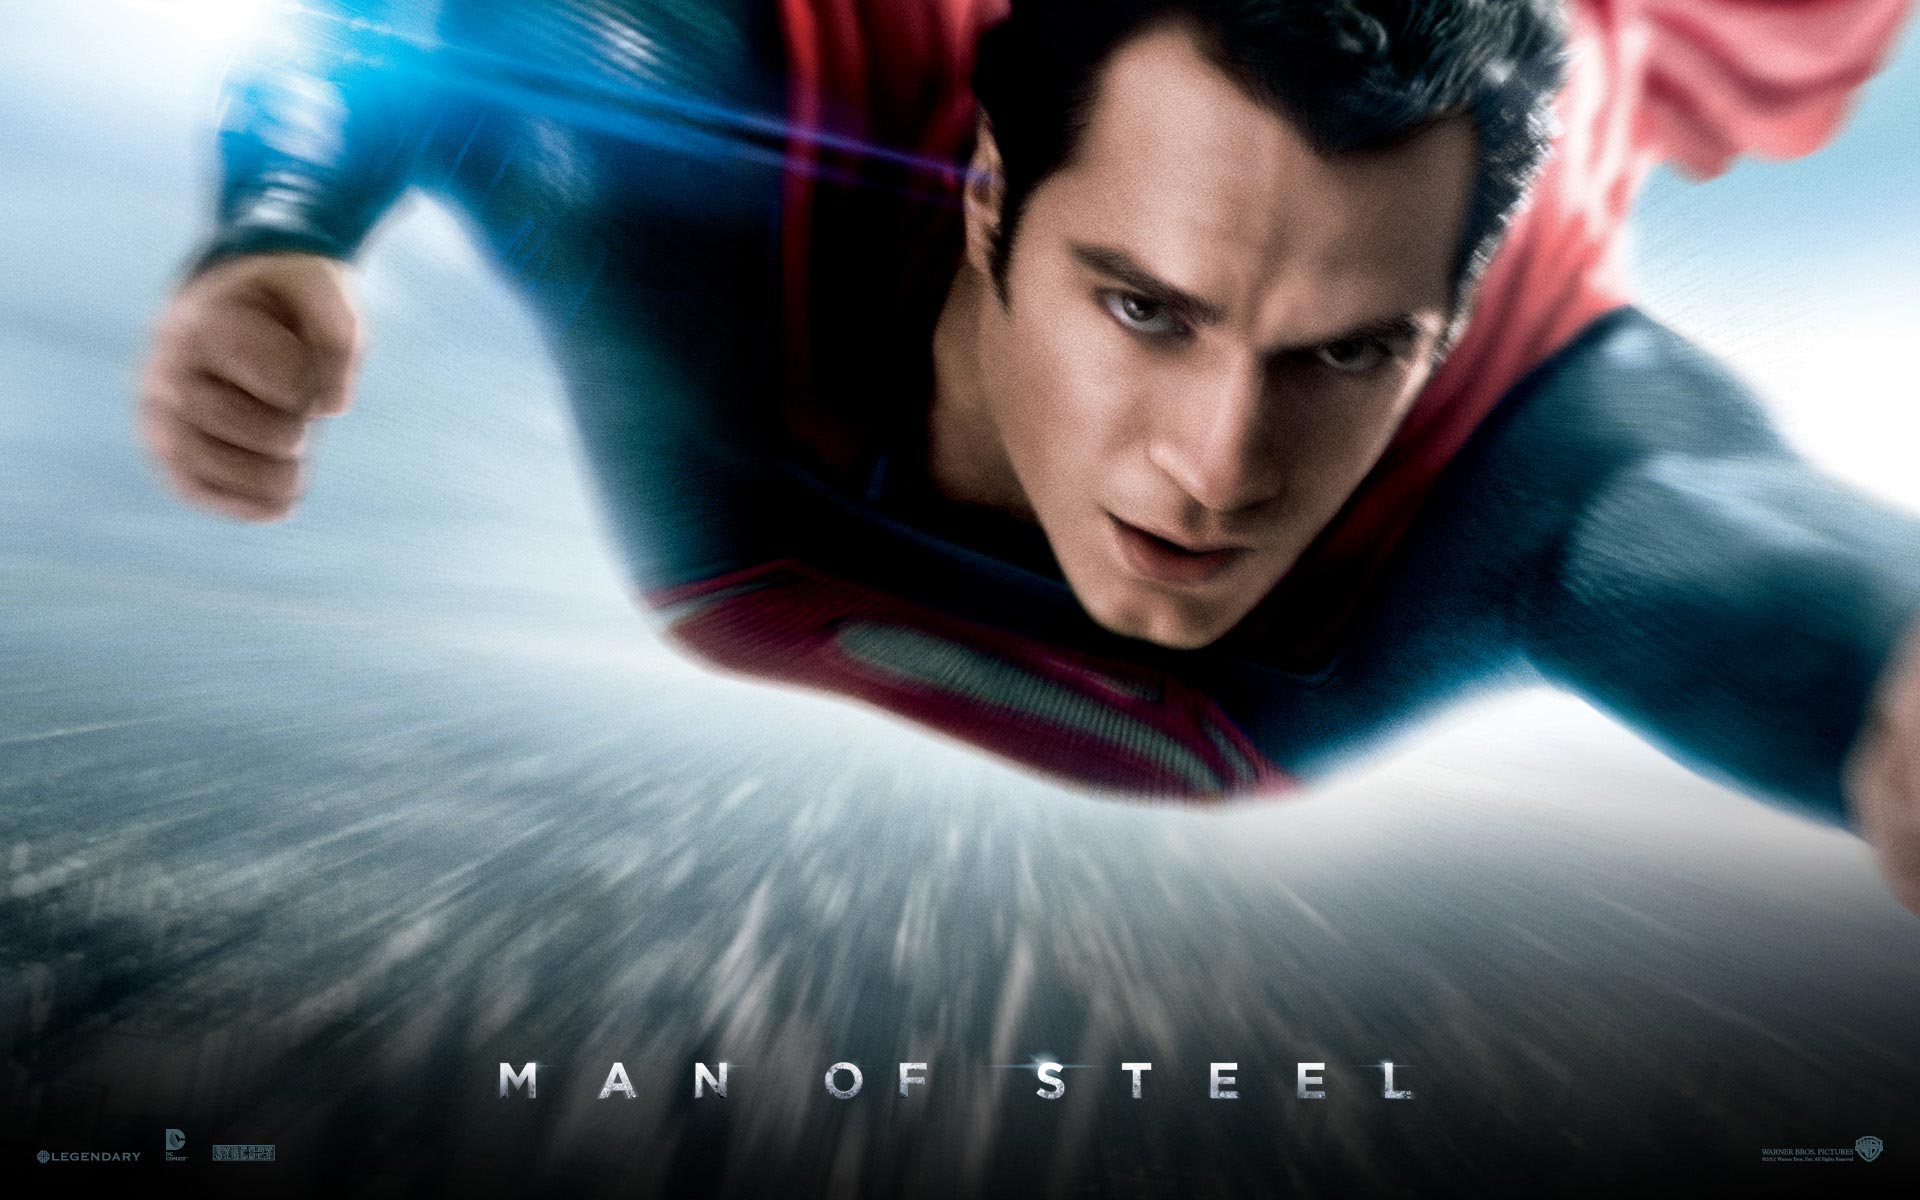 Geek insider, geekinsider, geekinsider. Com,, man of steel movie review: it’s a bird, it’s a plane, it’s a good reboot, entertainment